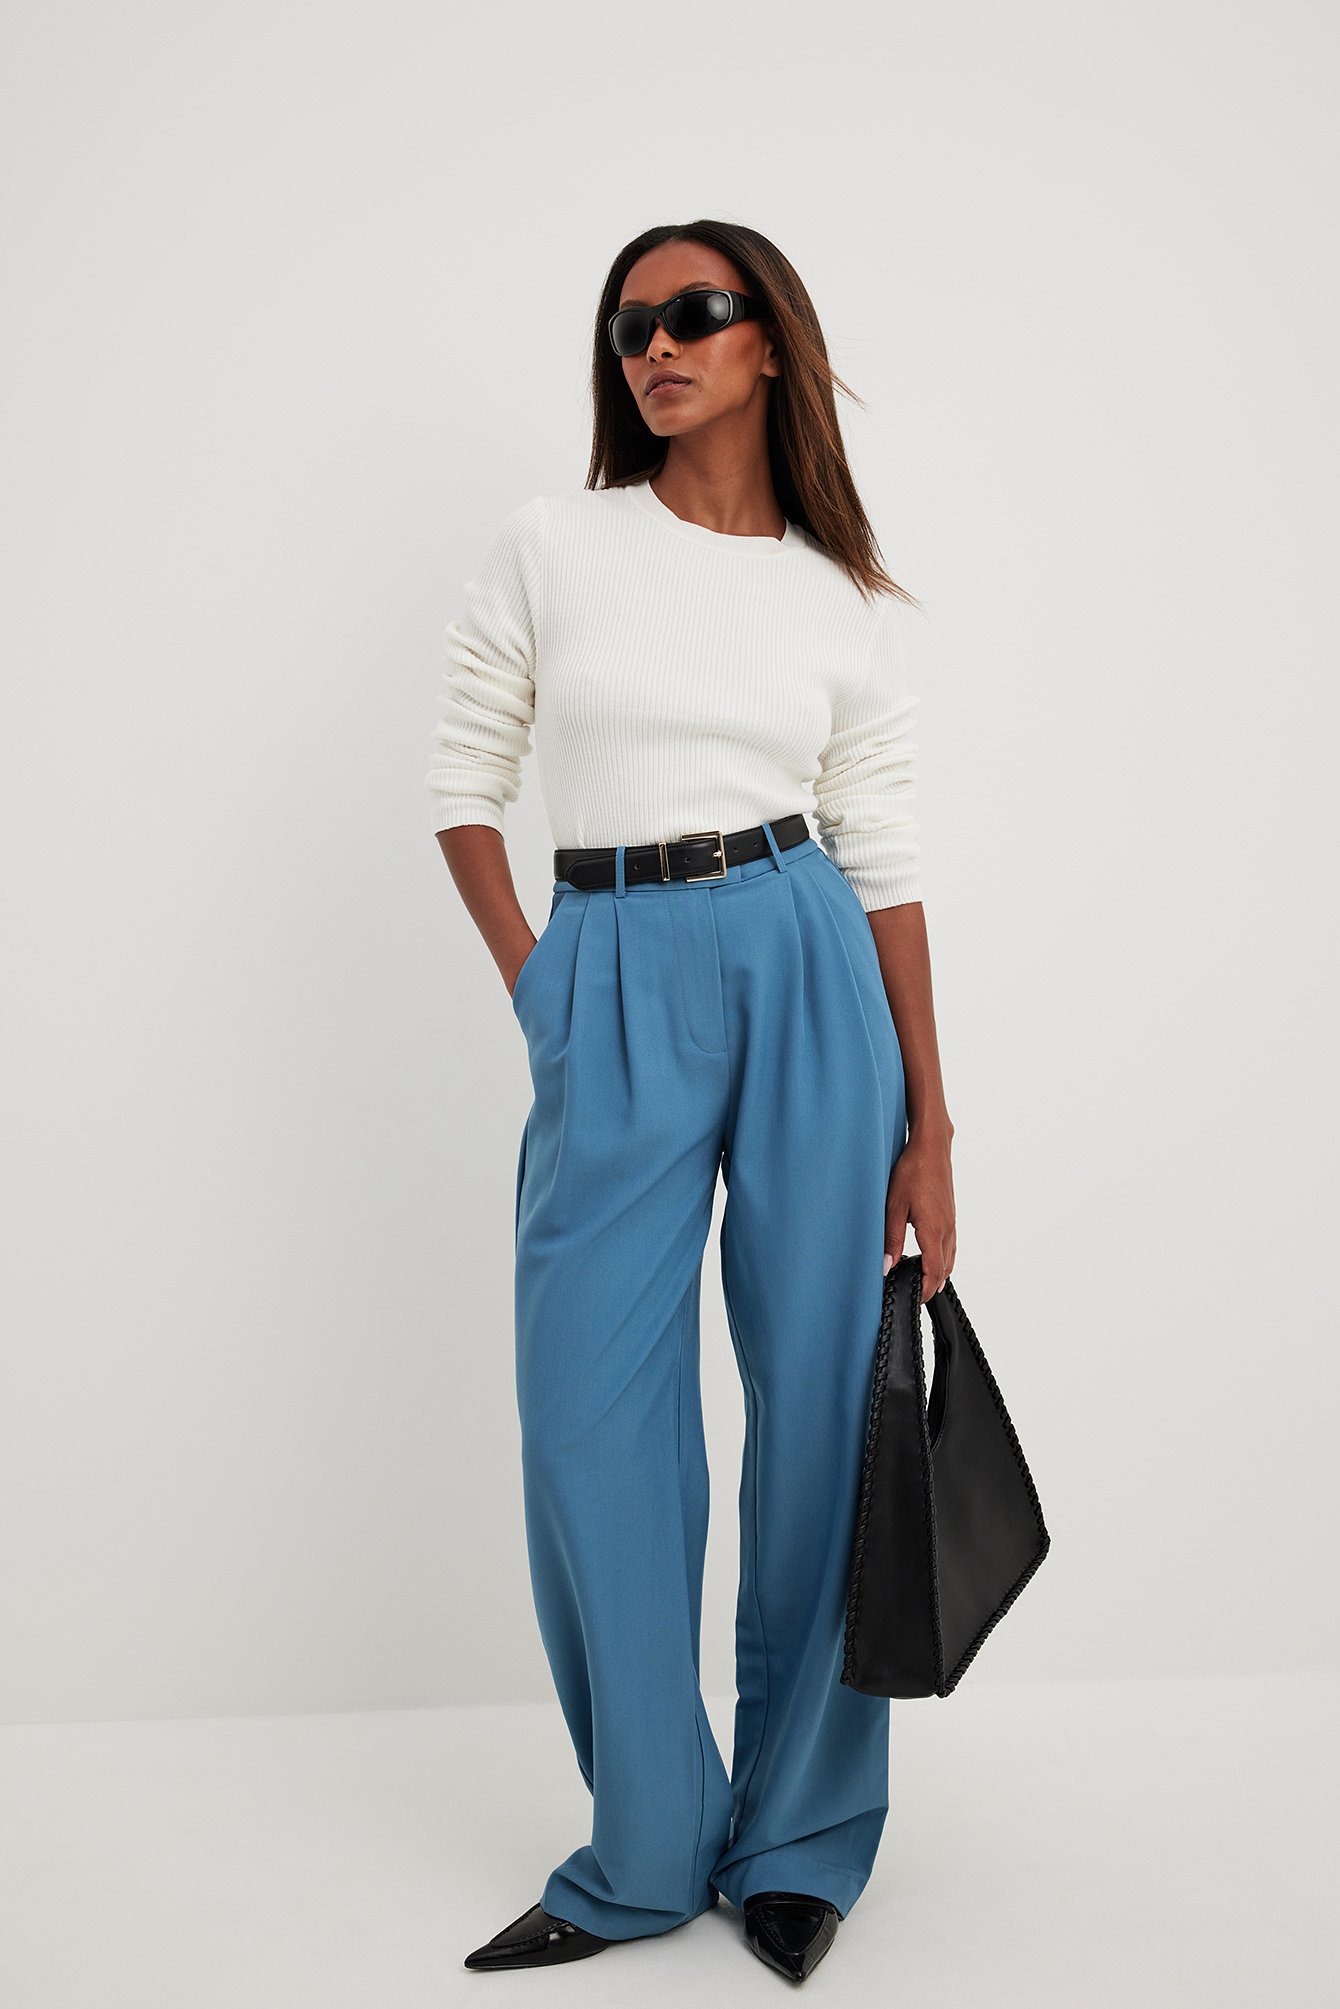 One Shoulder Ruffle Top + High Waist Wide Leg Pants (Style Pantry